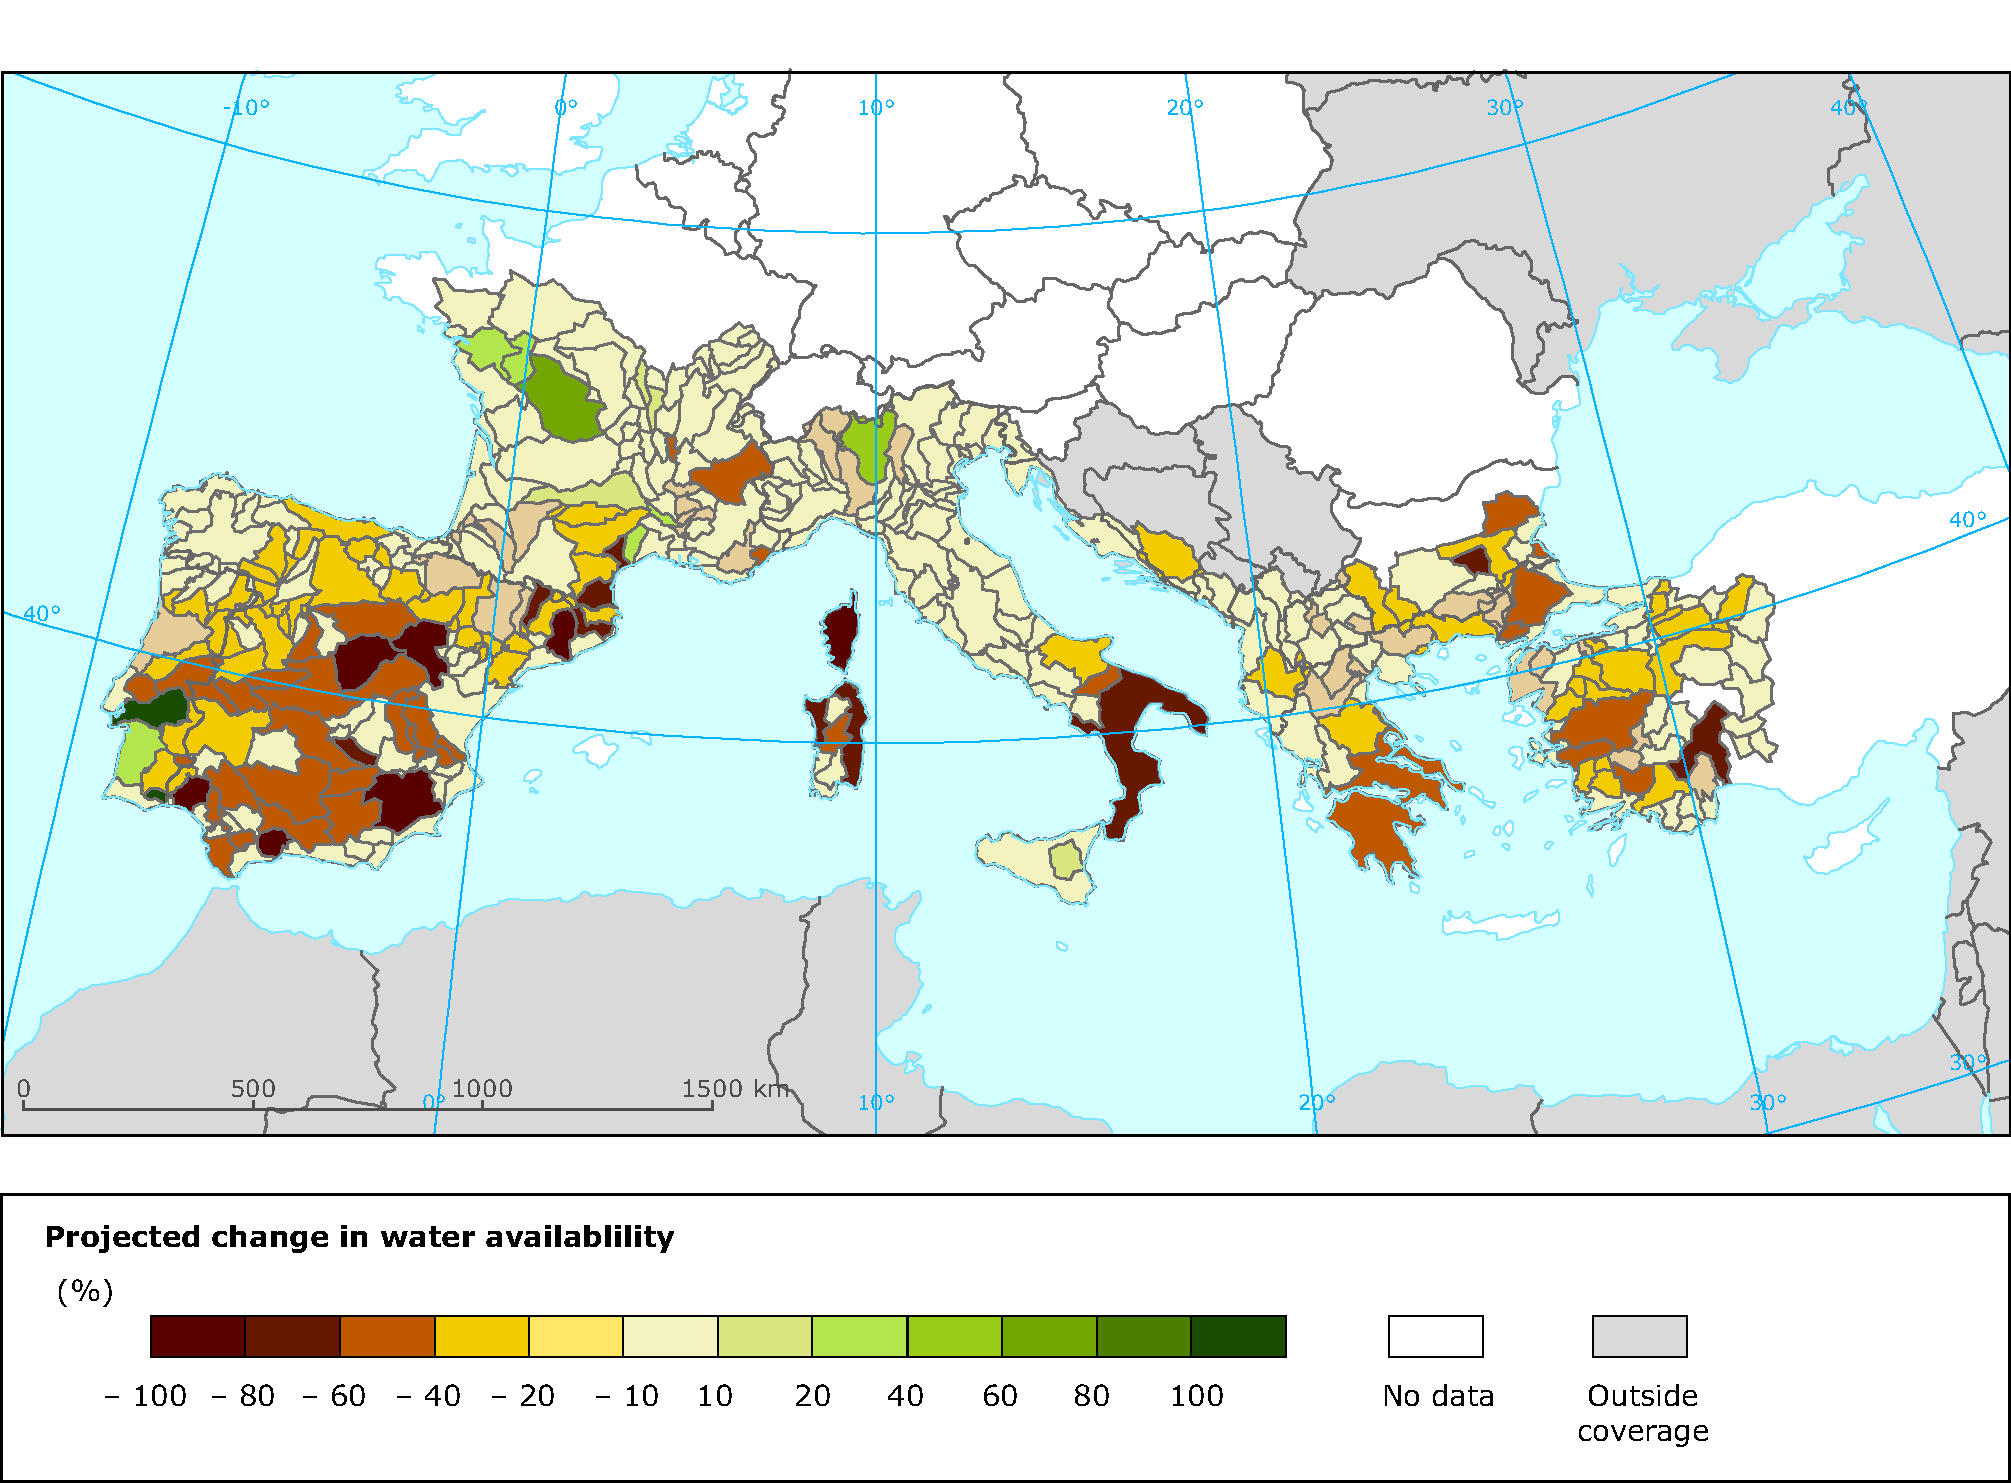 Projected change in water availability for irrigation in the Mediterranean region 